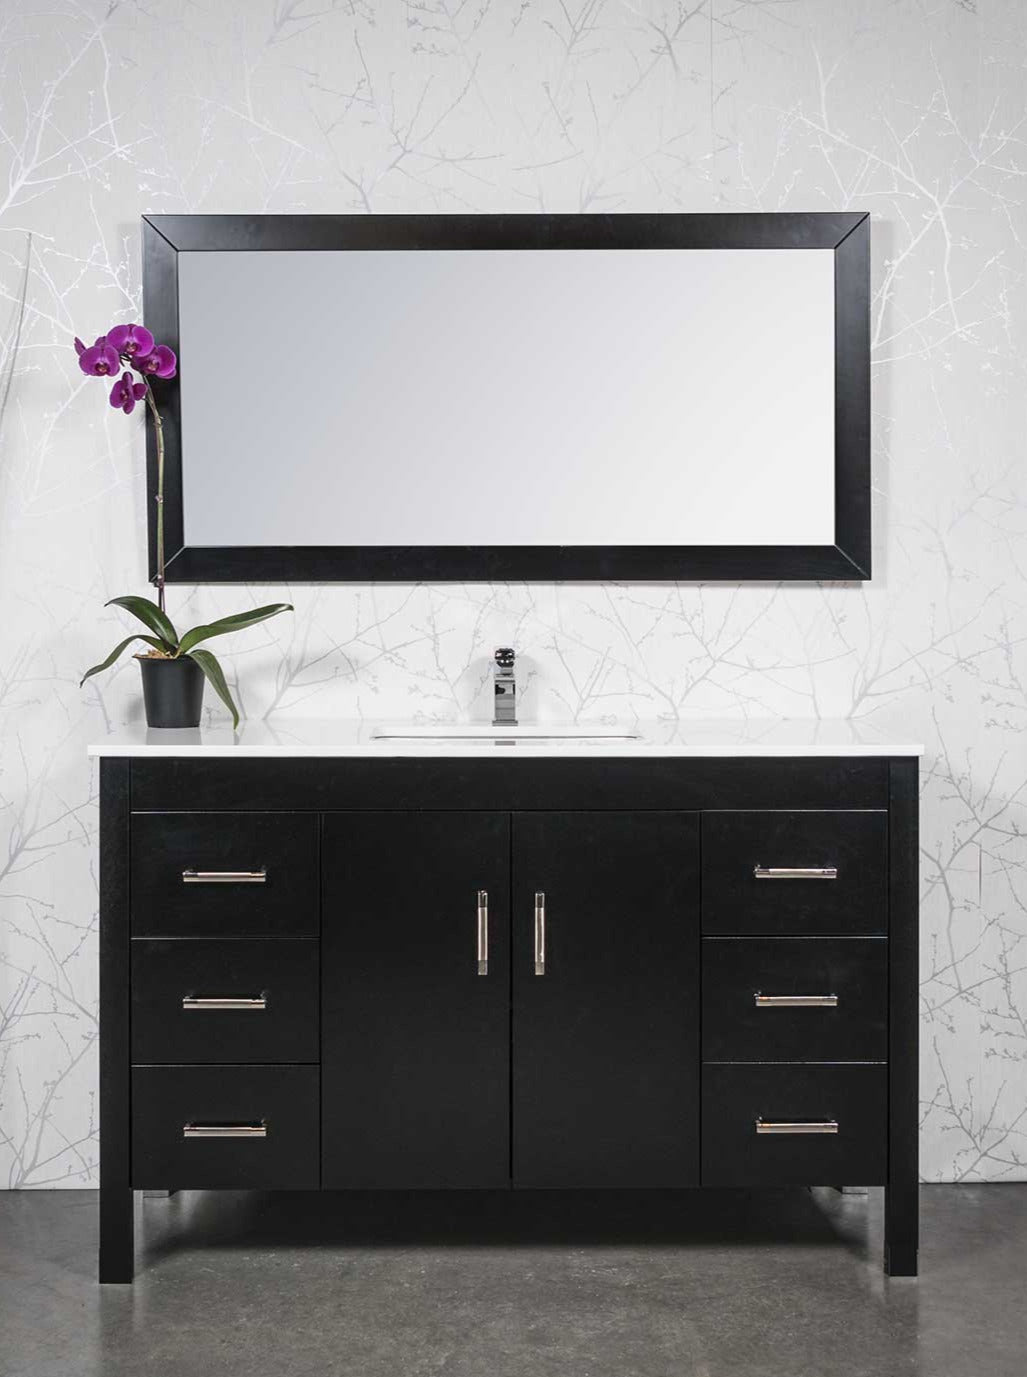 55 inch black vanity with drawers on either side and cupbaord in the center. white counter. black wood framed mirrors